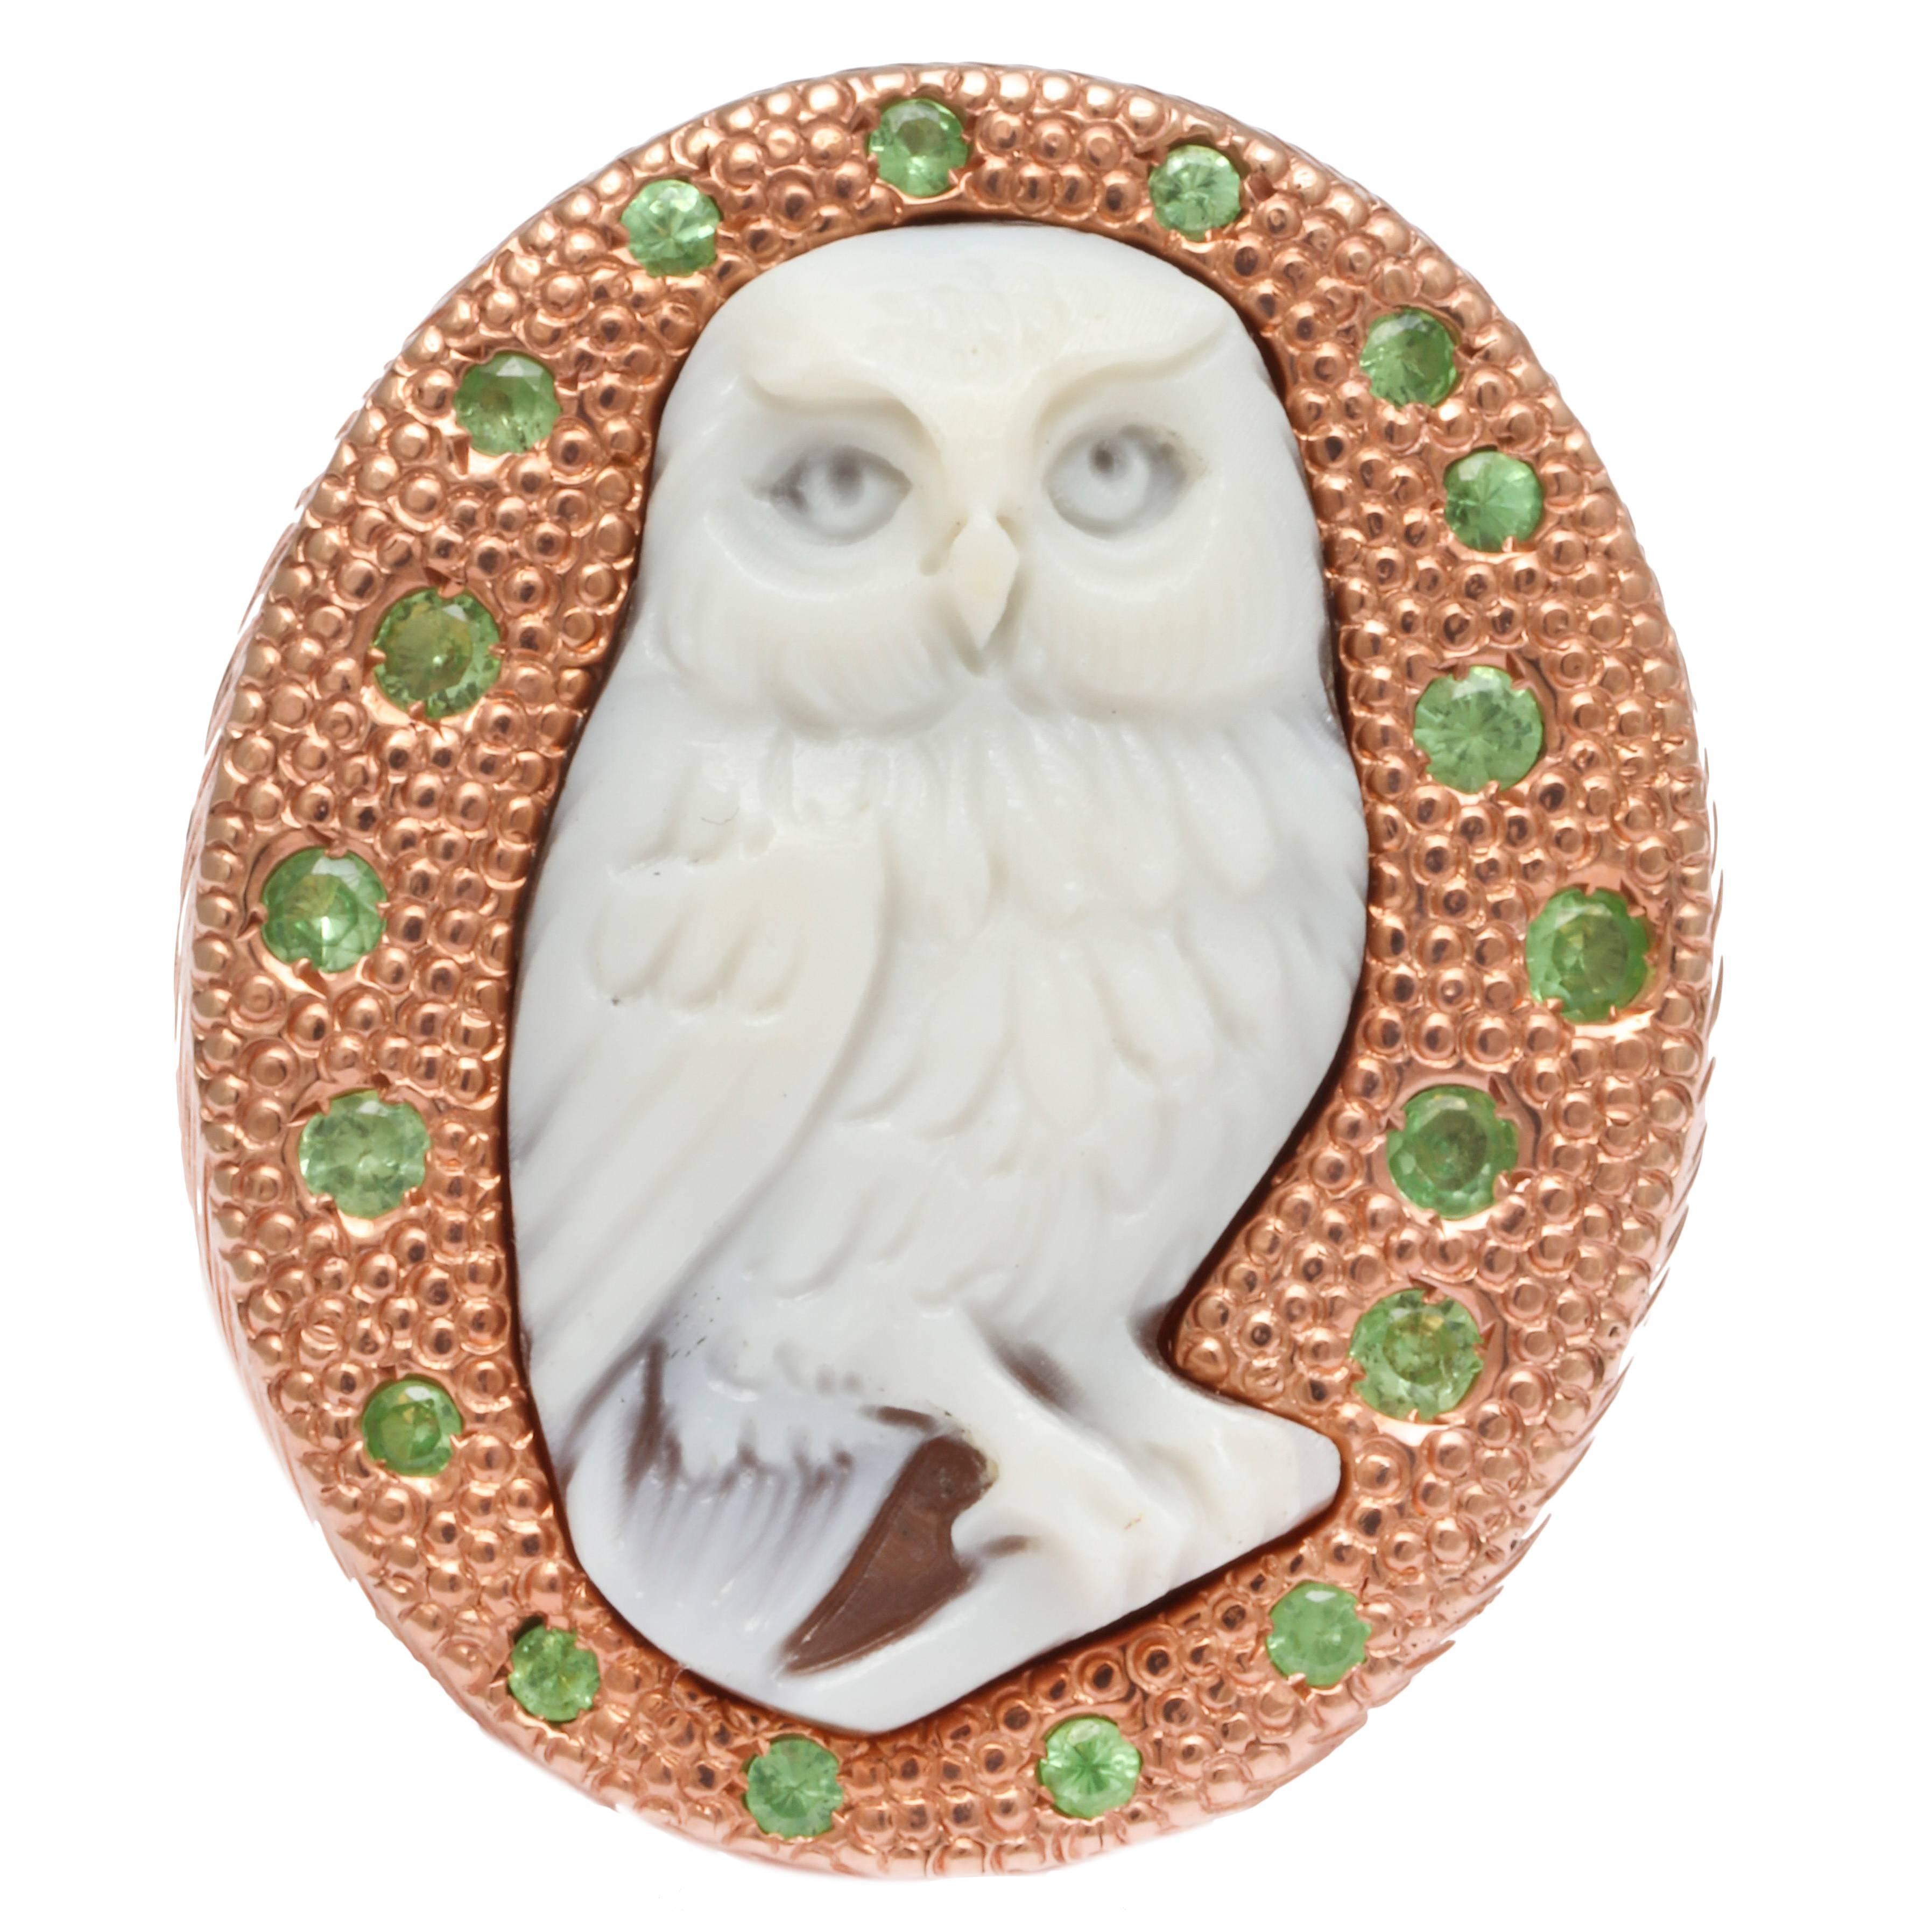 25mm sardonyx shell cameo hand-carved, set in sterling silver rose rhodium plated ring with tsavorites.